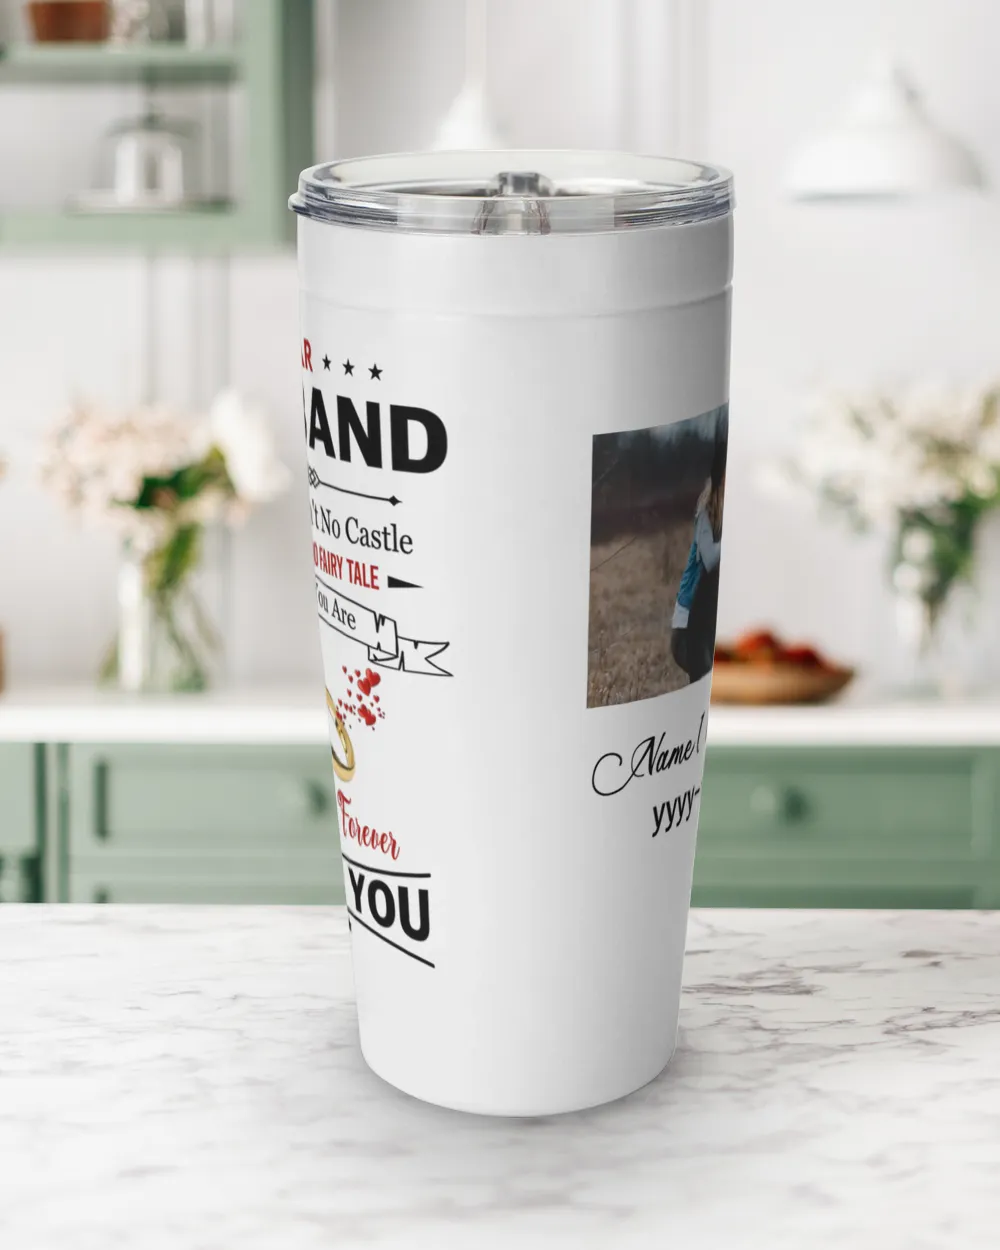 Personalized Husband Tumbler Our Home Ain't No Castle